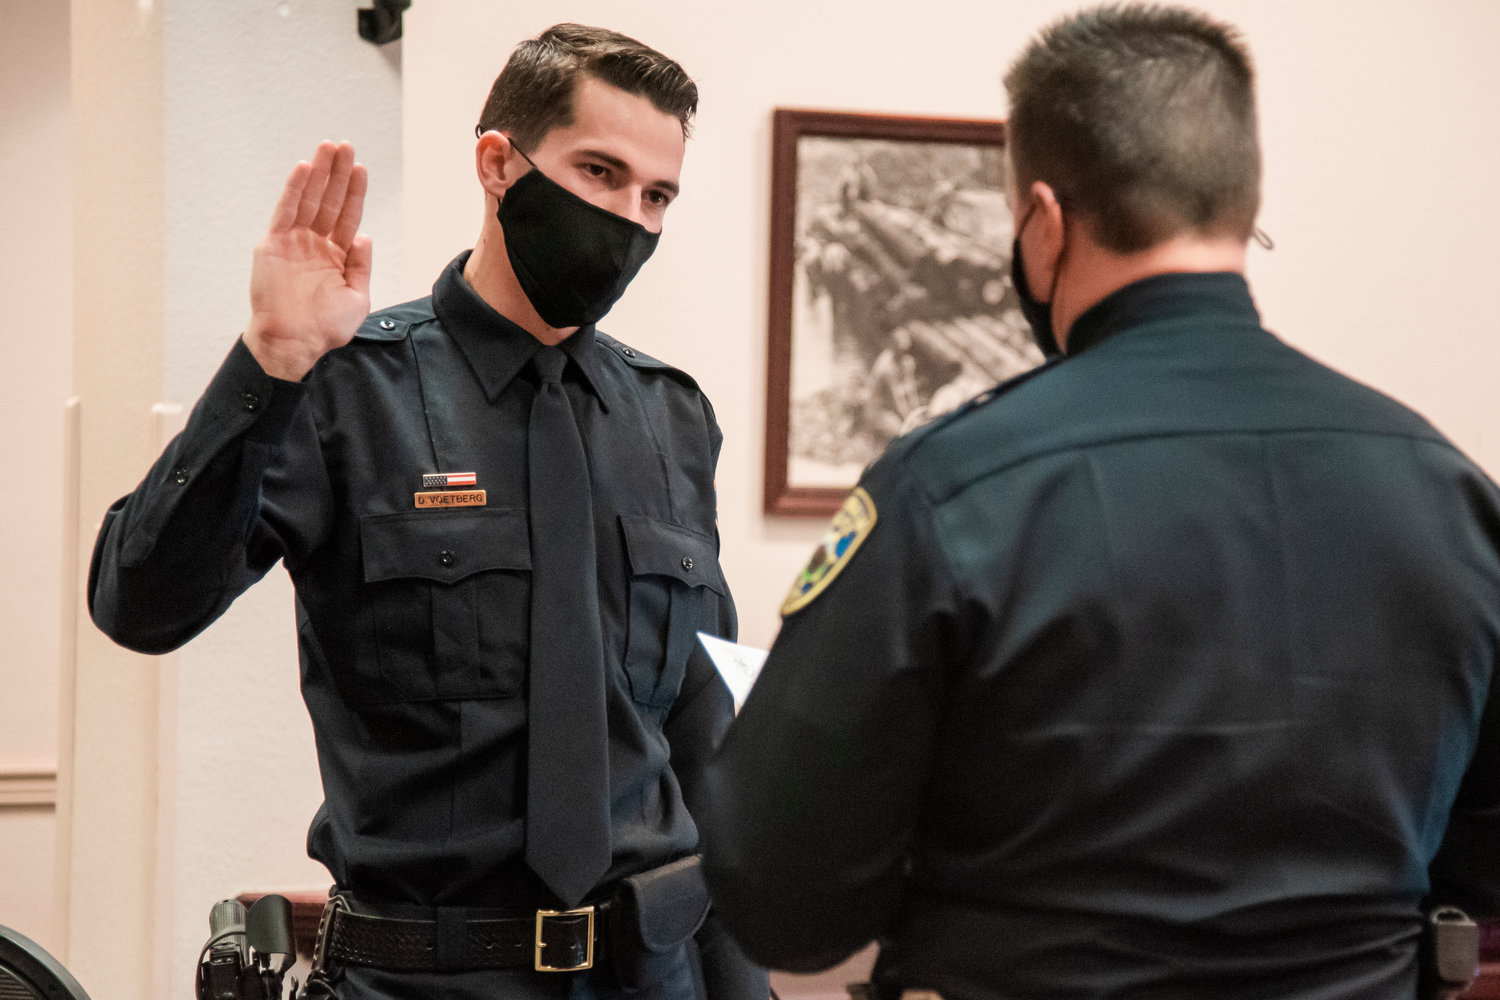 Centralia native Deter Voetberg was sworn in Tuesday by Centralia Police Chief Stacy Denham as the city's newest police officer. A Centralia High School graduate, he wanted to become an officer "because he wanted to help the community that he was raised in and believes in," Denham said. He originally started his law enforcement career as a community service officer for the department. He graduated from police academy on Nov. 10, and now starts his field training. His father had the honor of pinning his badge.